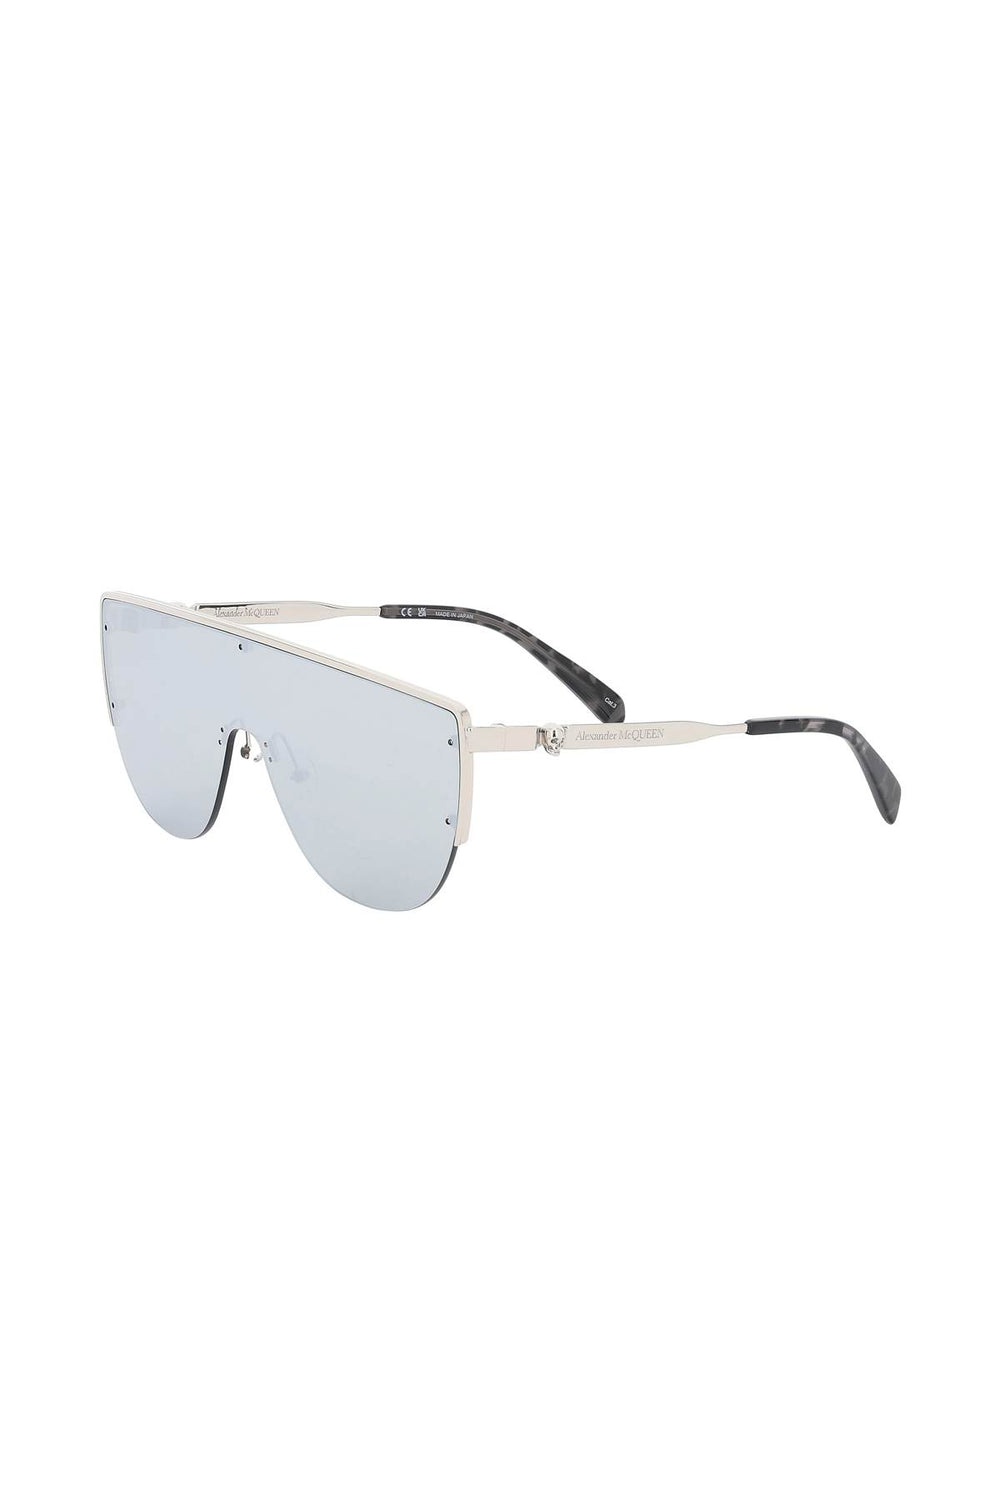 Alexander mcqueen sunglasses with mirrored lenses and mask-style frame-1